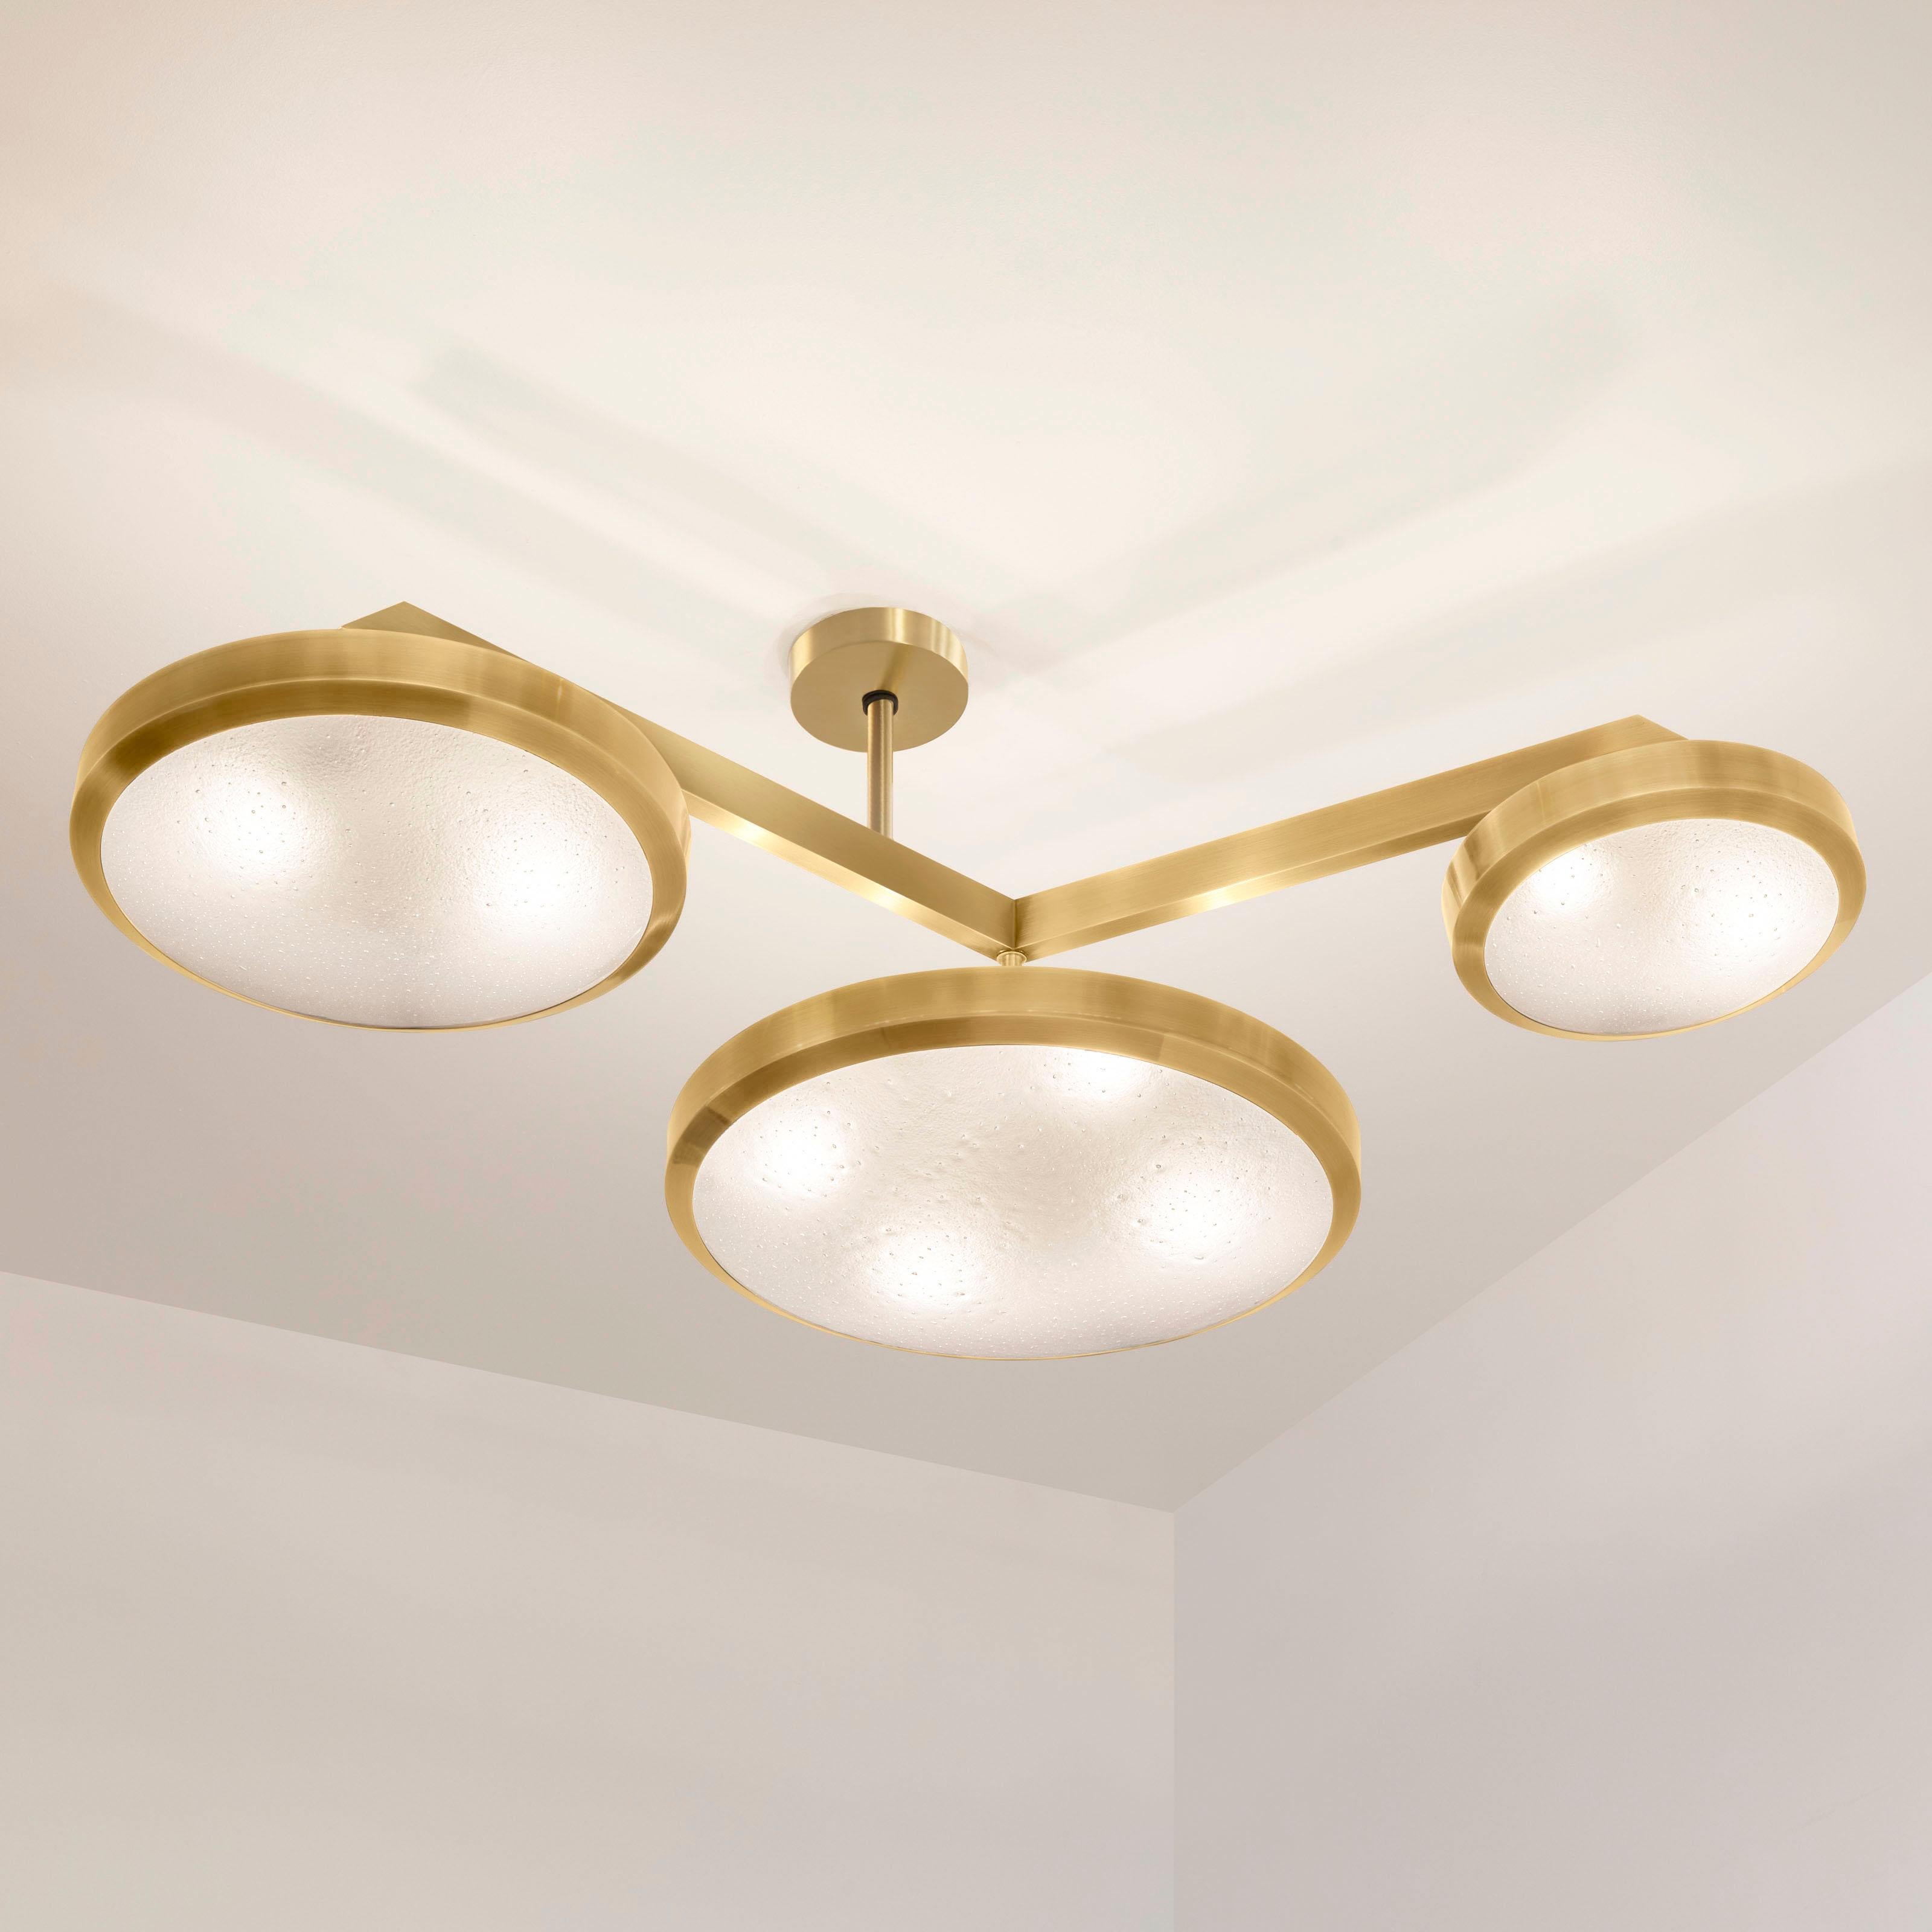 Contemporary Zeta Ceiling Light by Gaspare Asaro - Bronze Finish For Sale